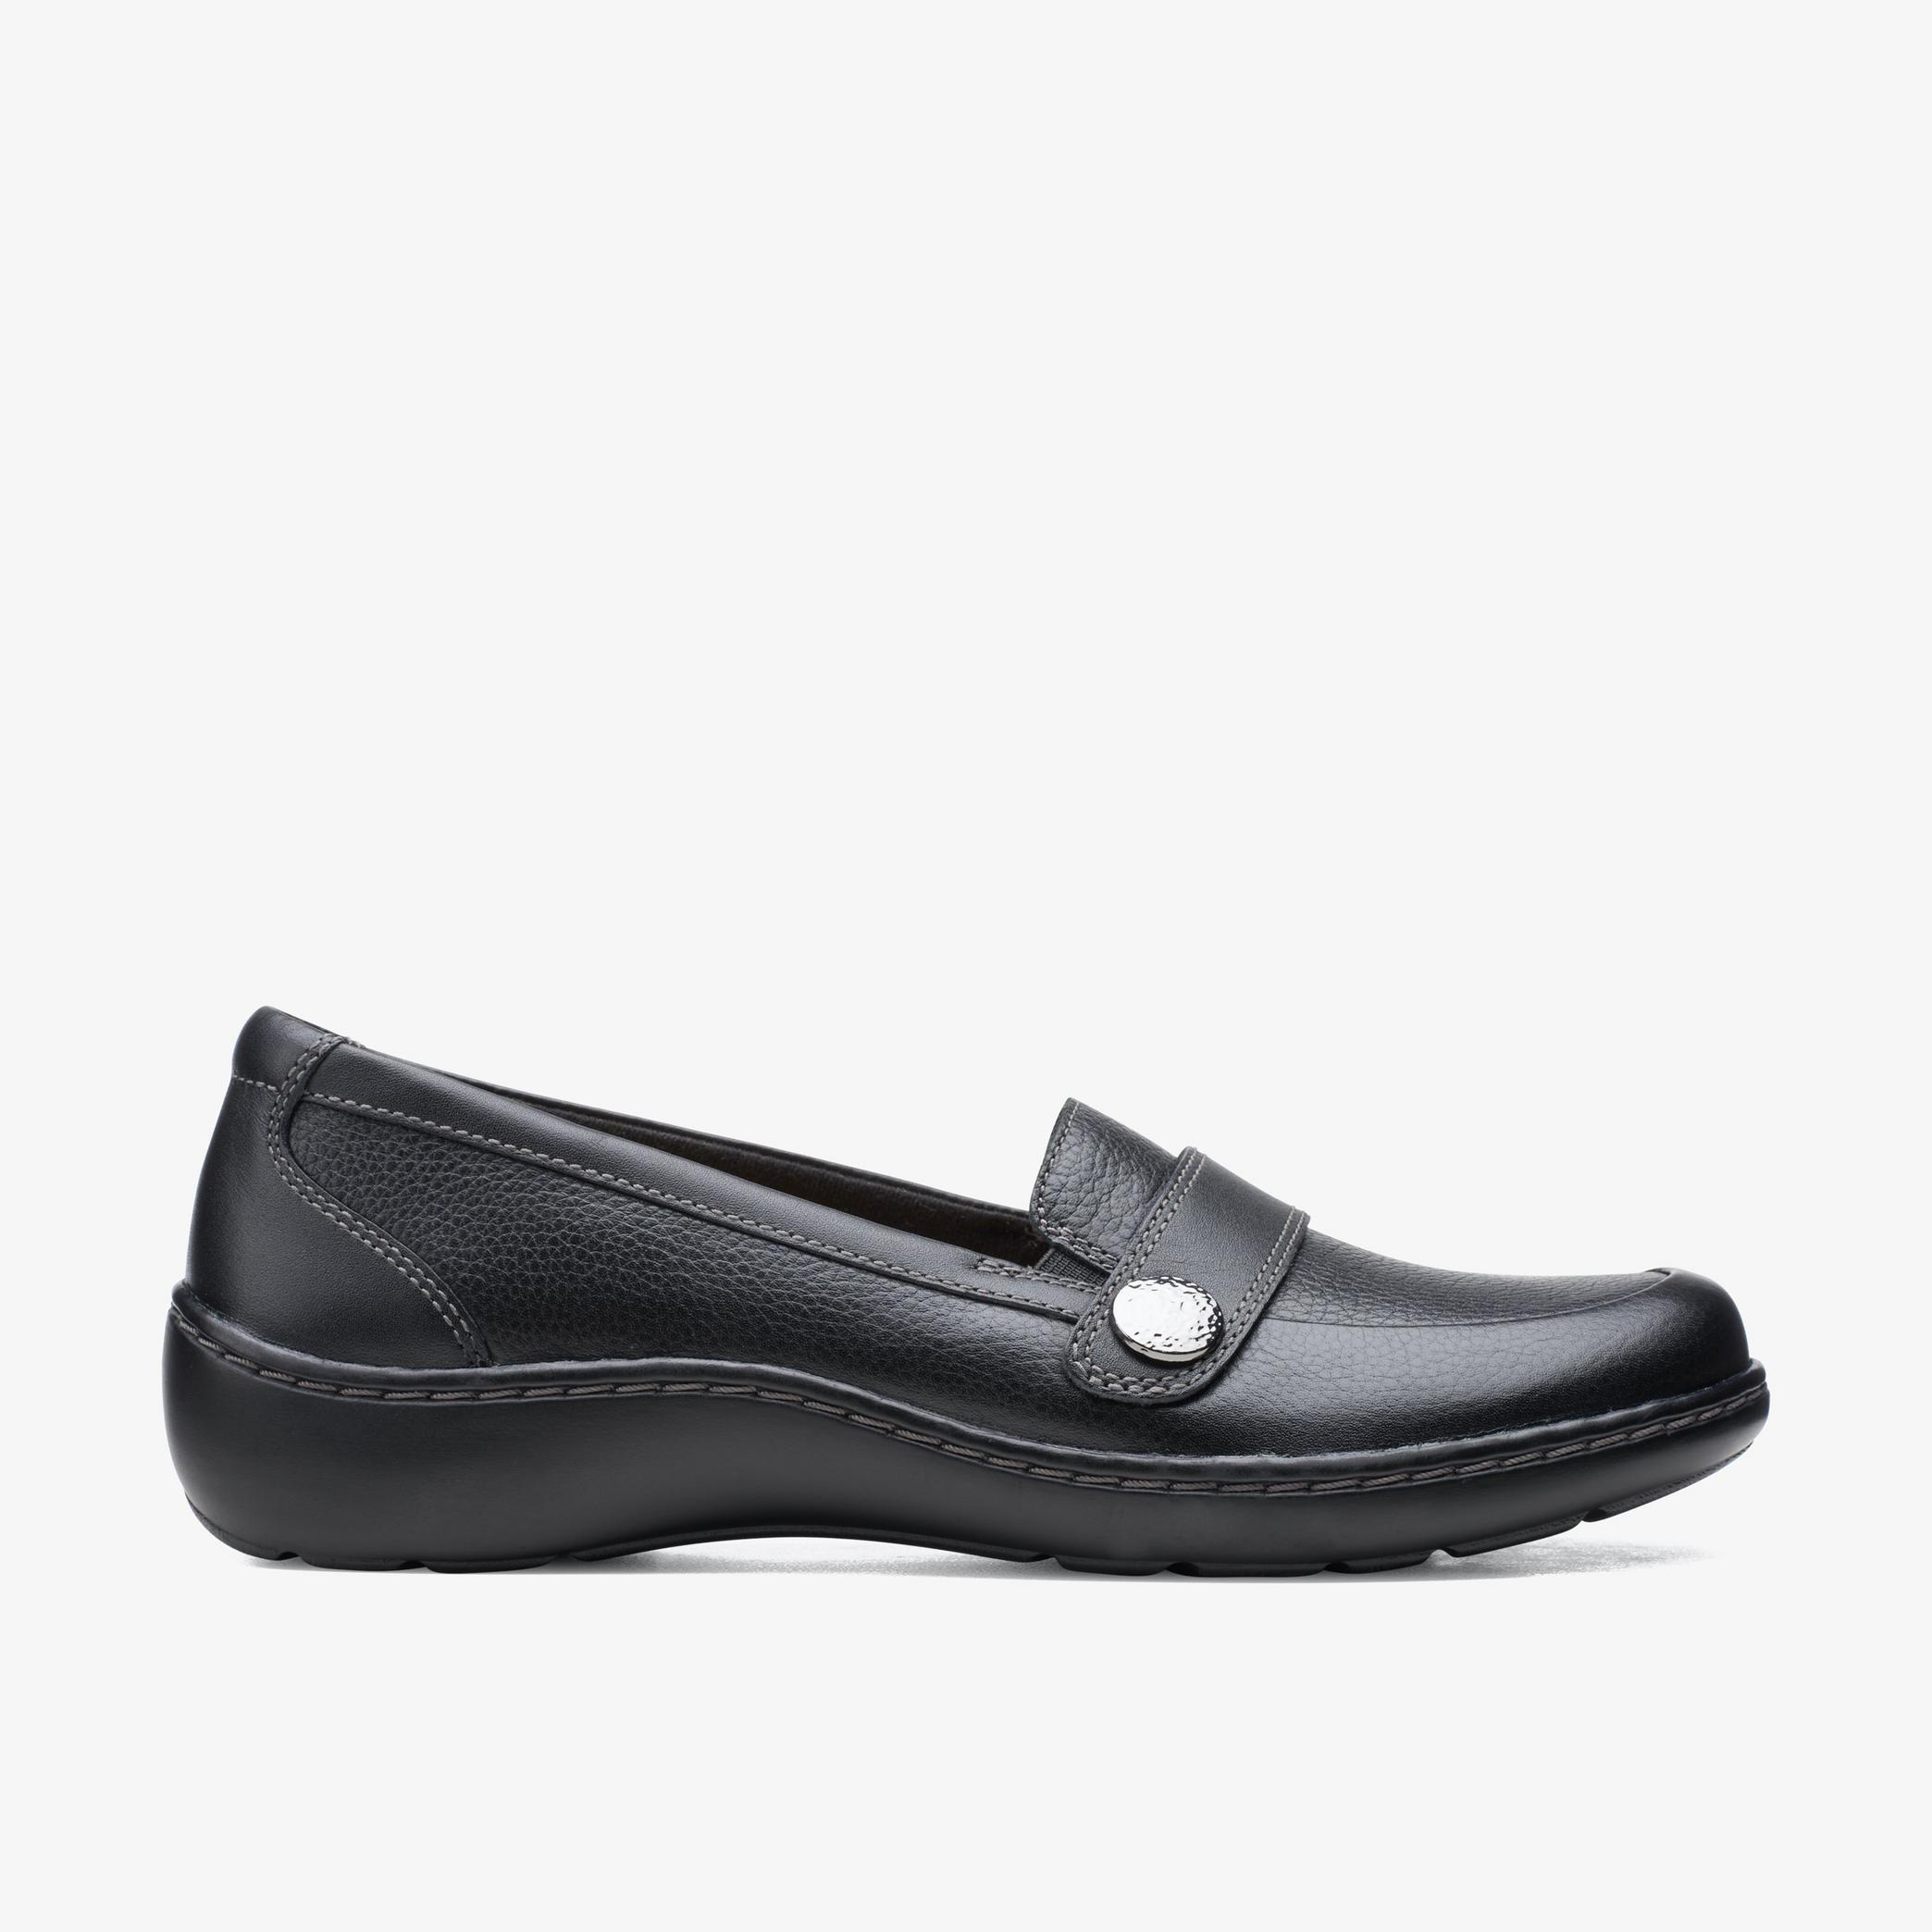 Cora Daisy Black Tumbled Loafers, view 1 of 6